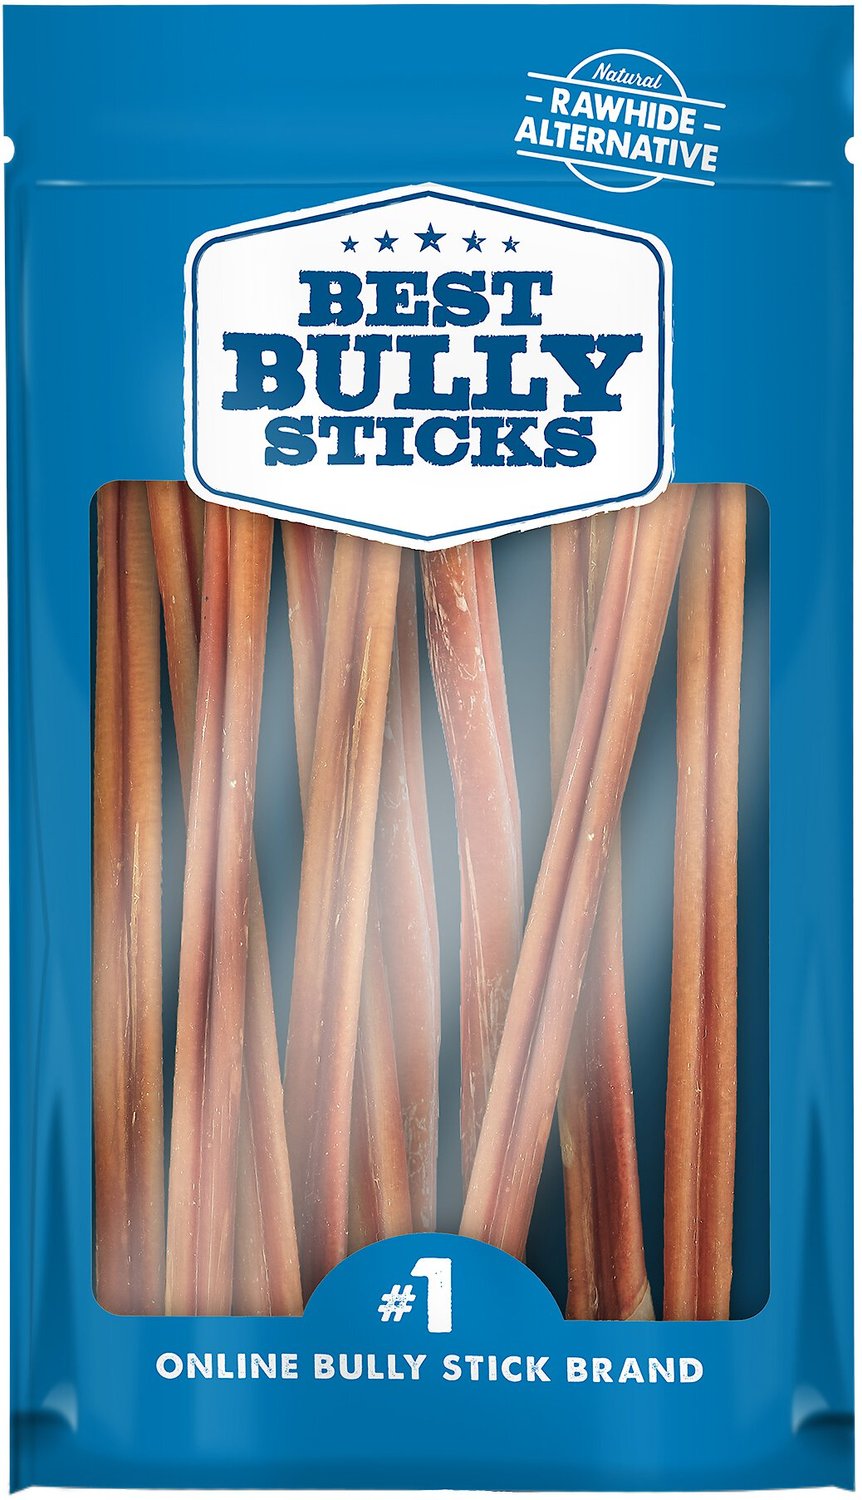 Download Bully Sticks Background